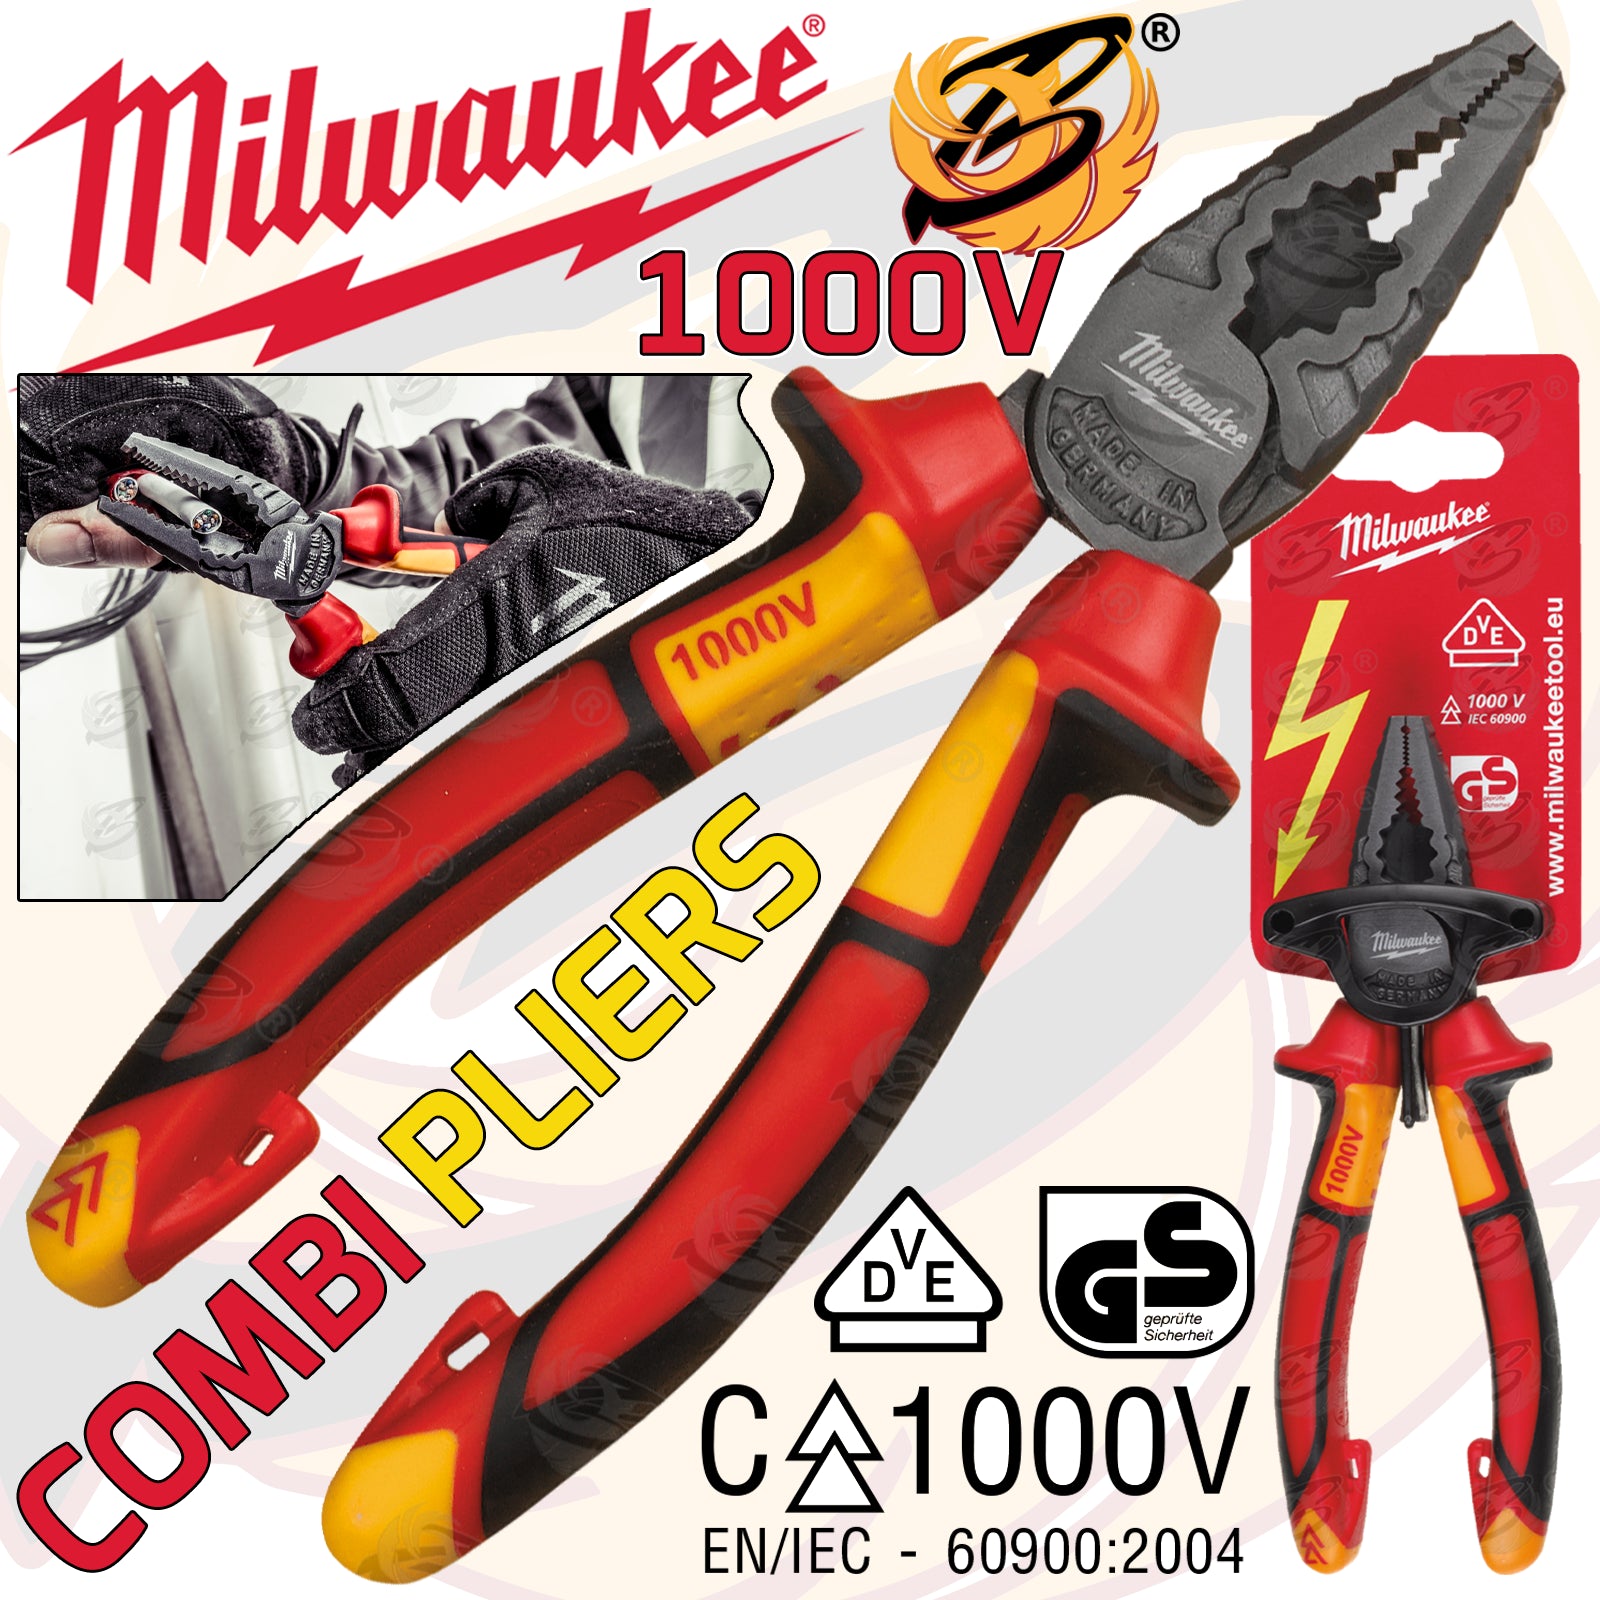 MILWAUKEE 1000V VDE COMBINATION PLIERS 165MM